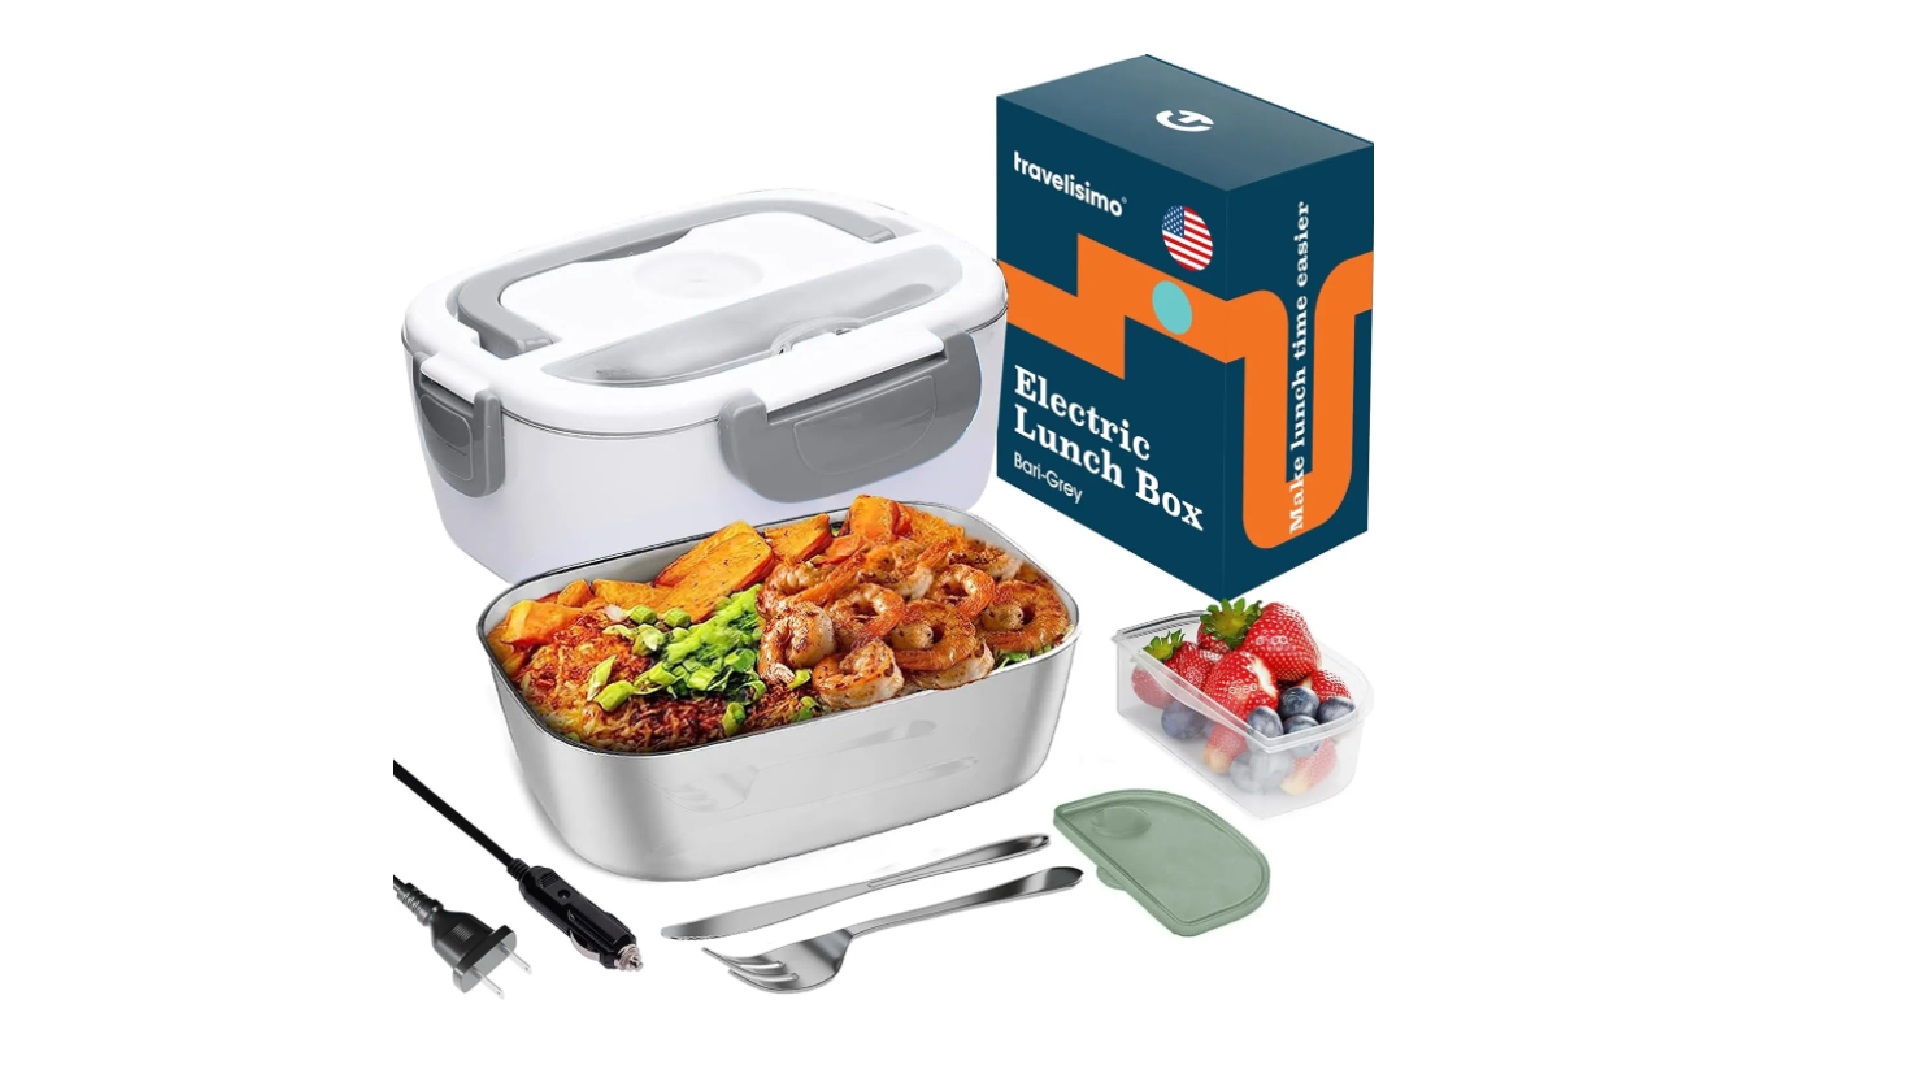 Crock Pot Electric Lunch Box Review (Best Portable Food Warmer) 